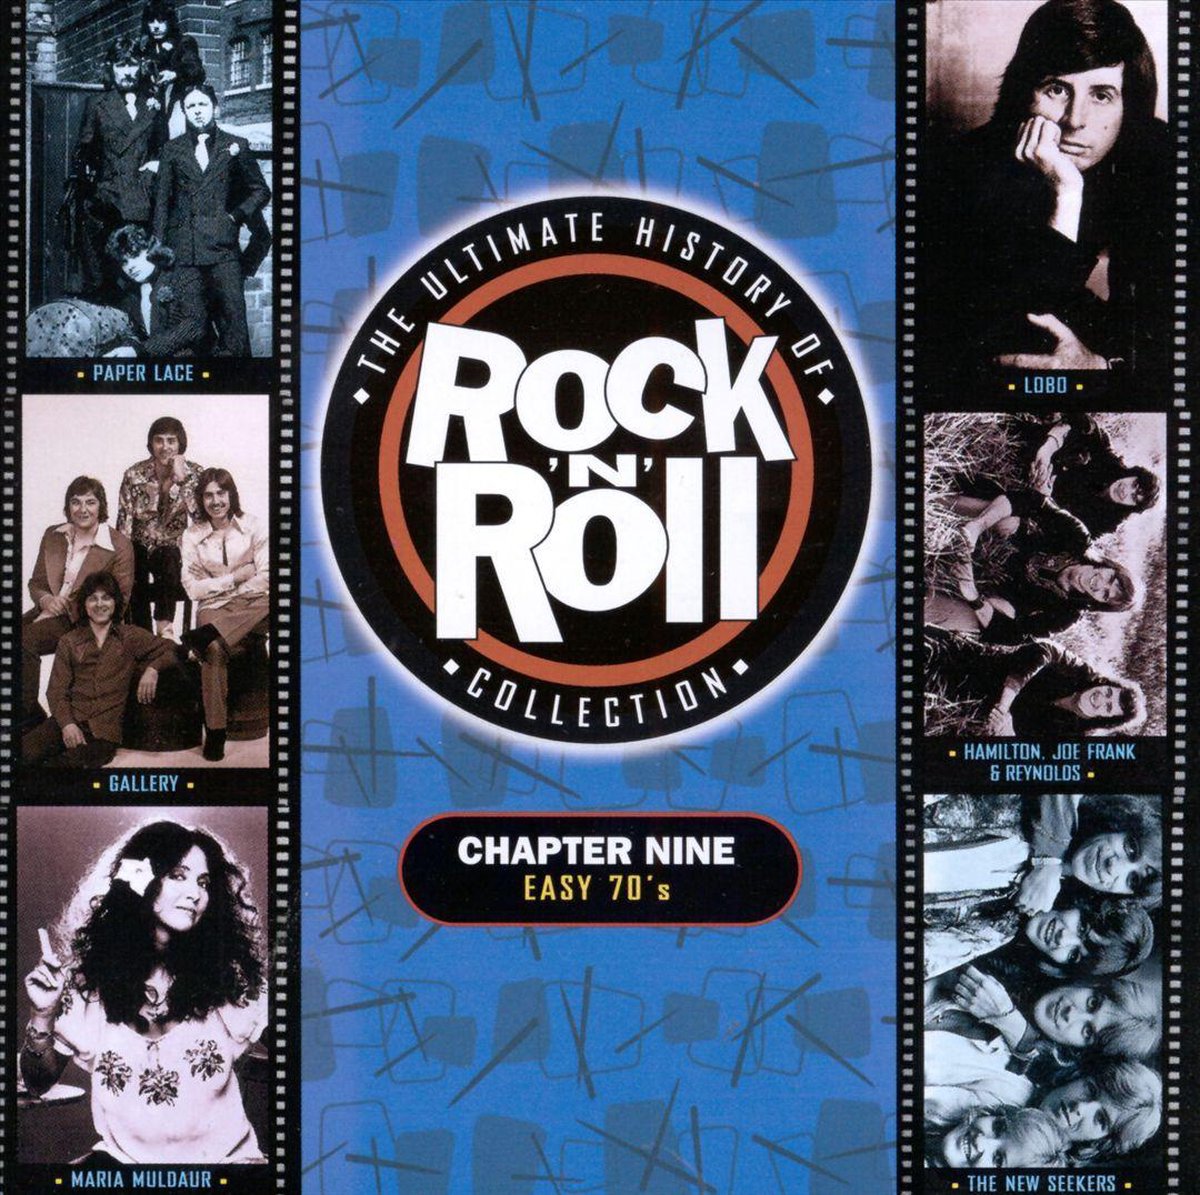 Ultimate History of Rock & Roll Collection, Vol. 9: Easy 70's - various artists